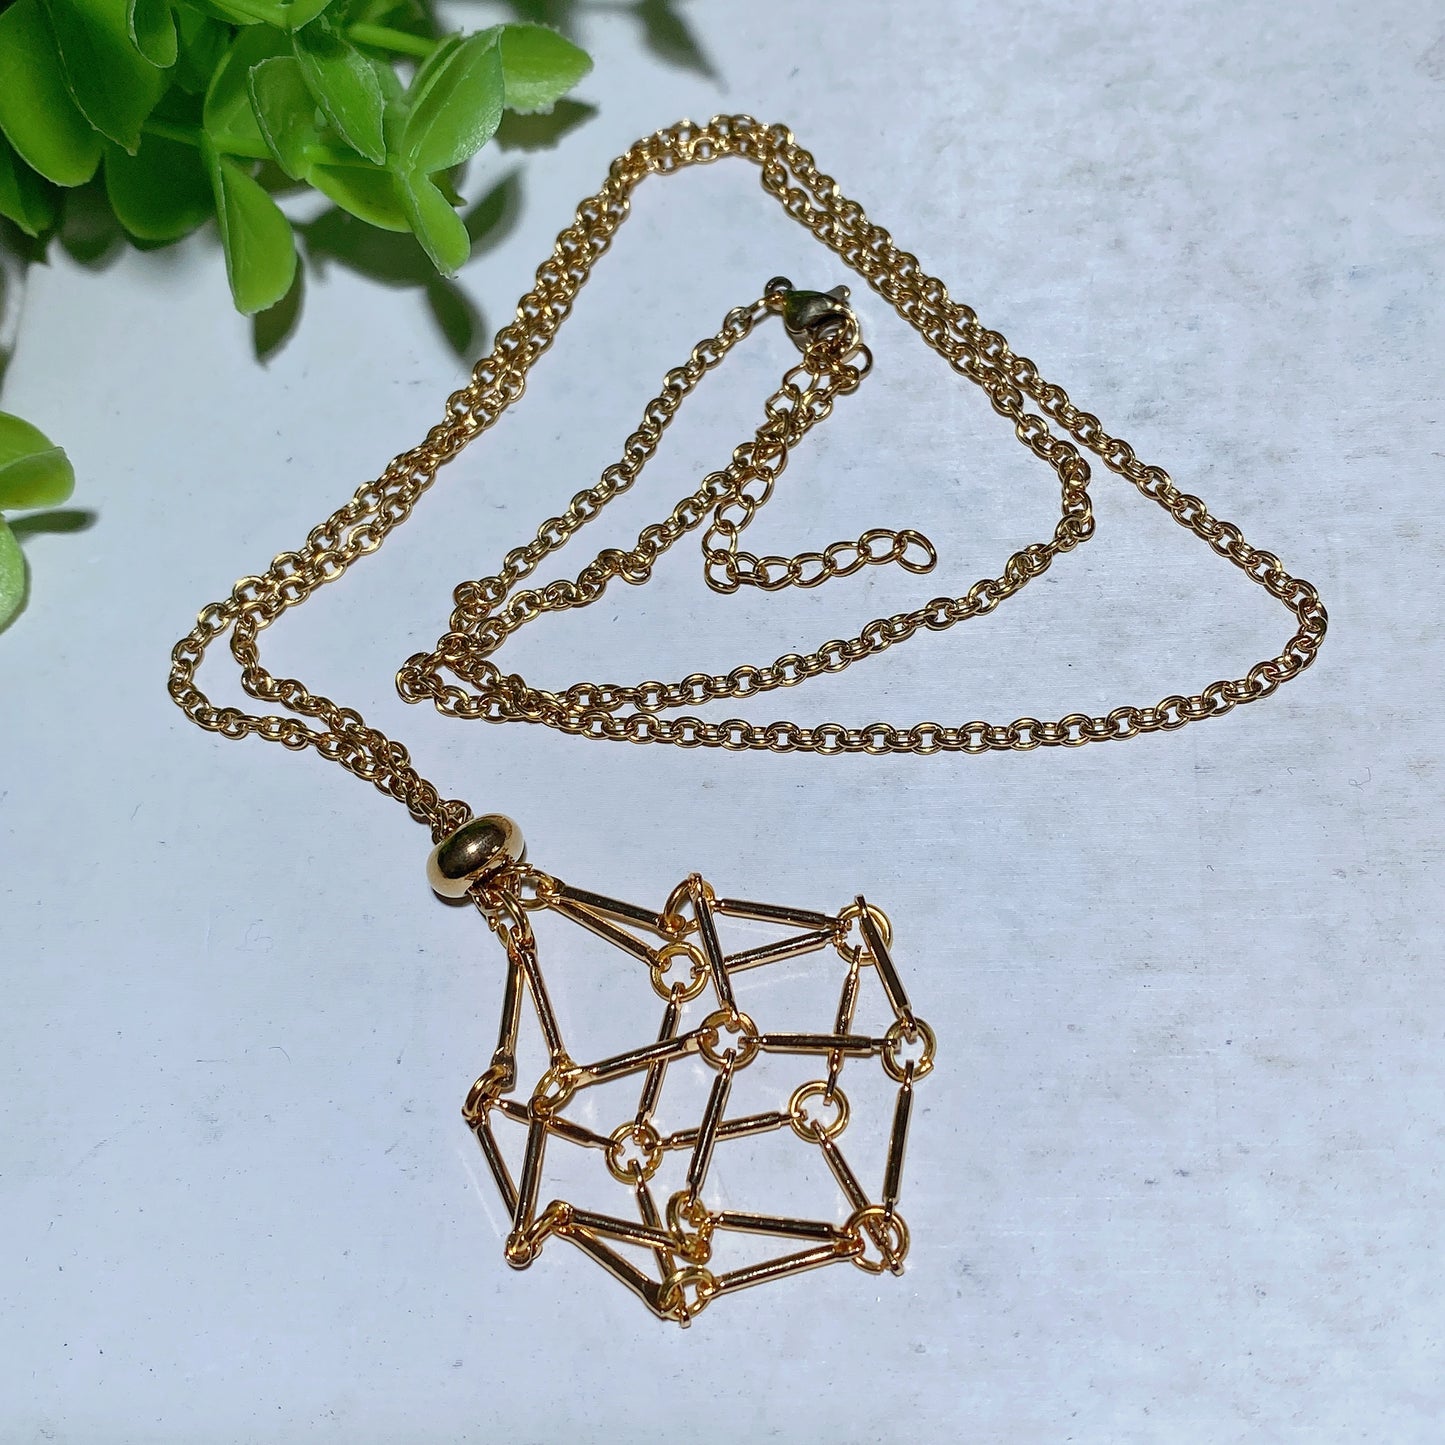 Golden Silver Color Web Design Necklace for Jewelry DIY